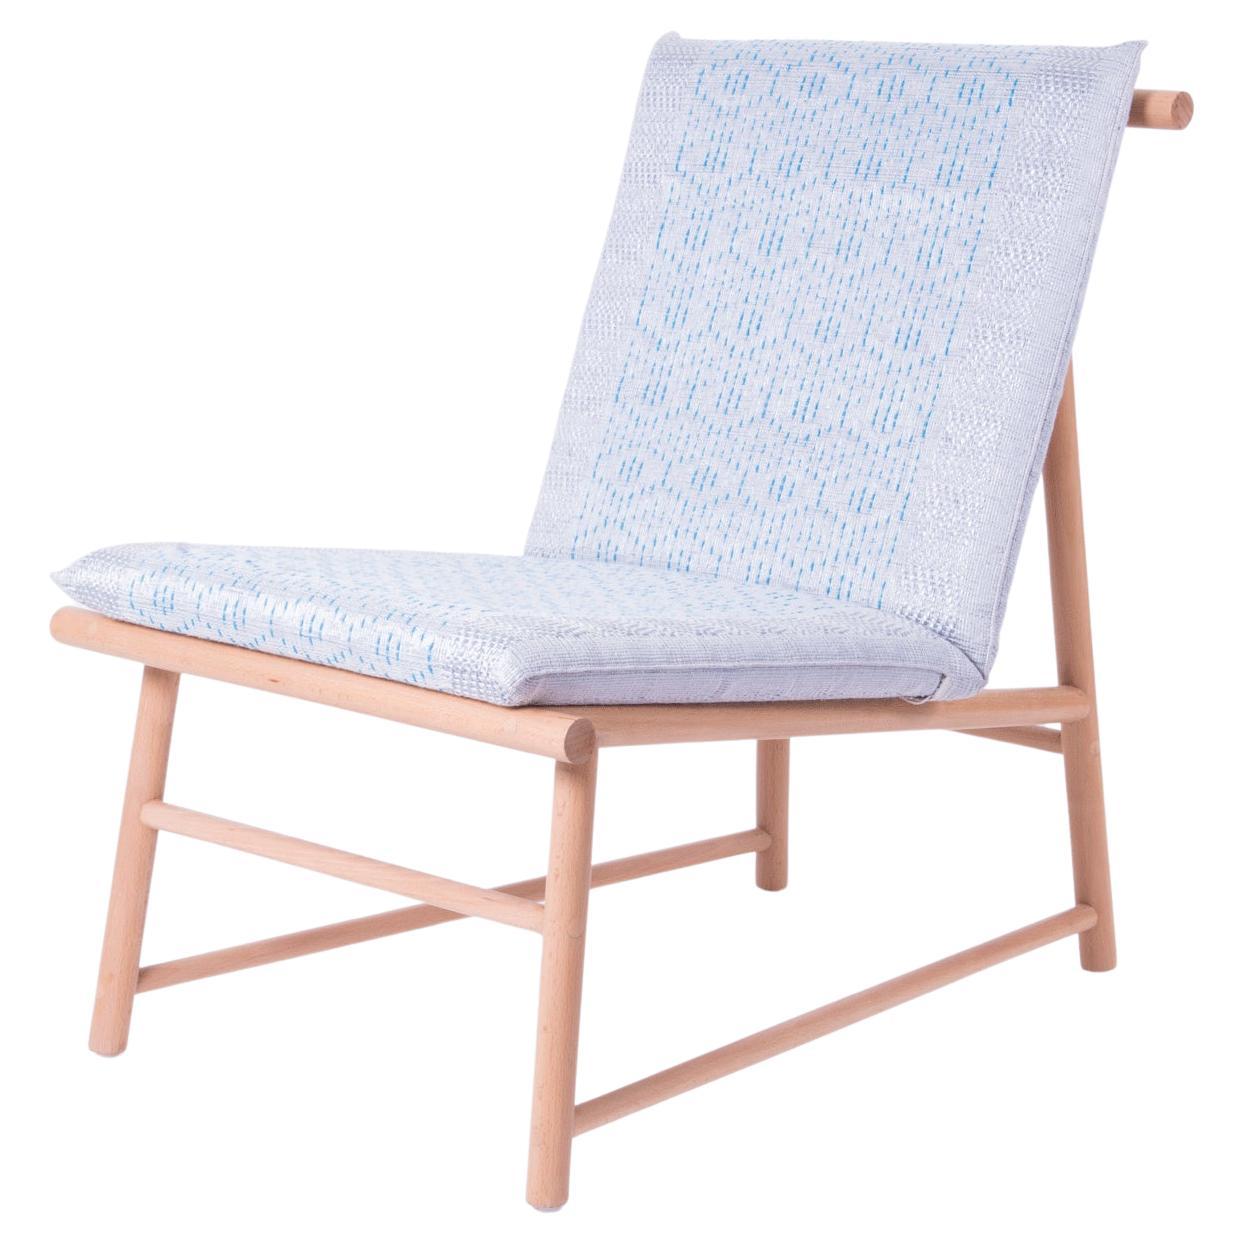 Easy Chair, Lounge Chair in Beech Wood with Handmade Raffia Textile in PedalLoom For Sale